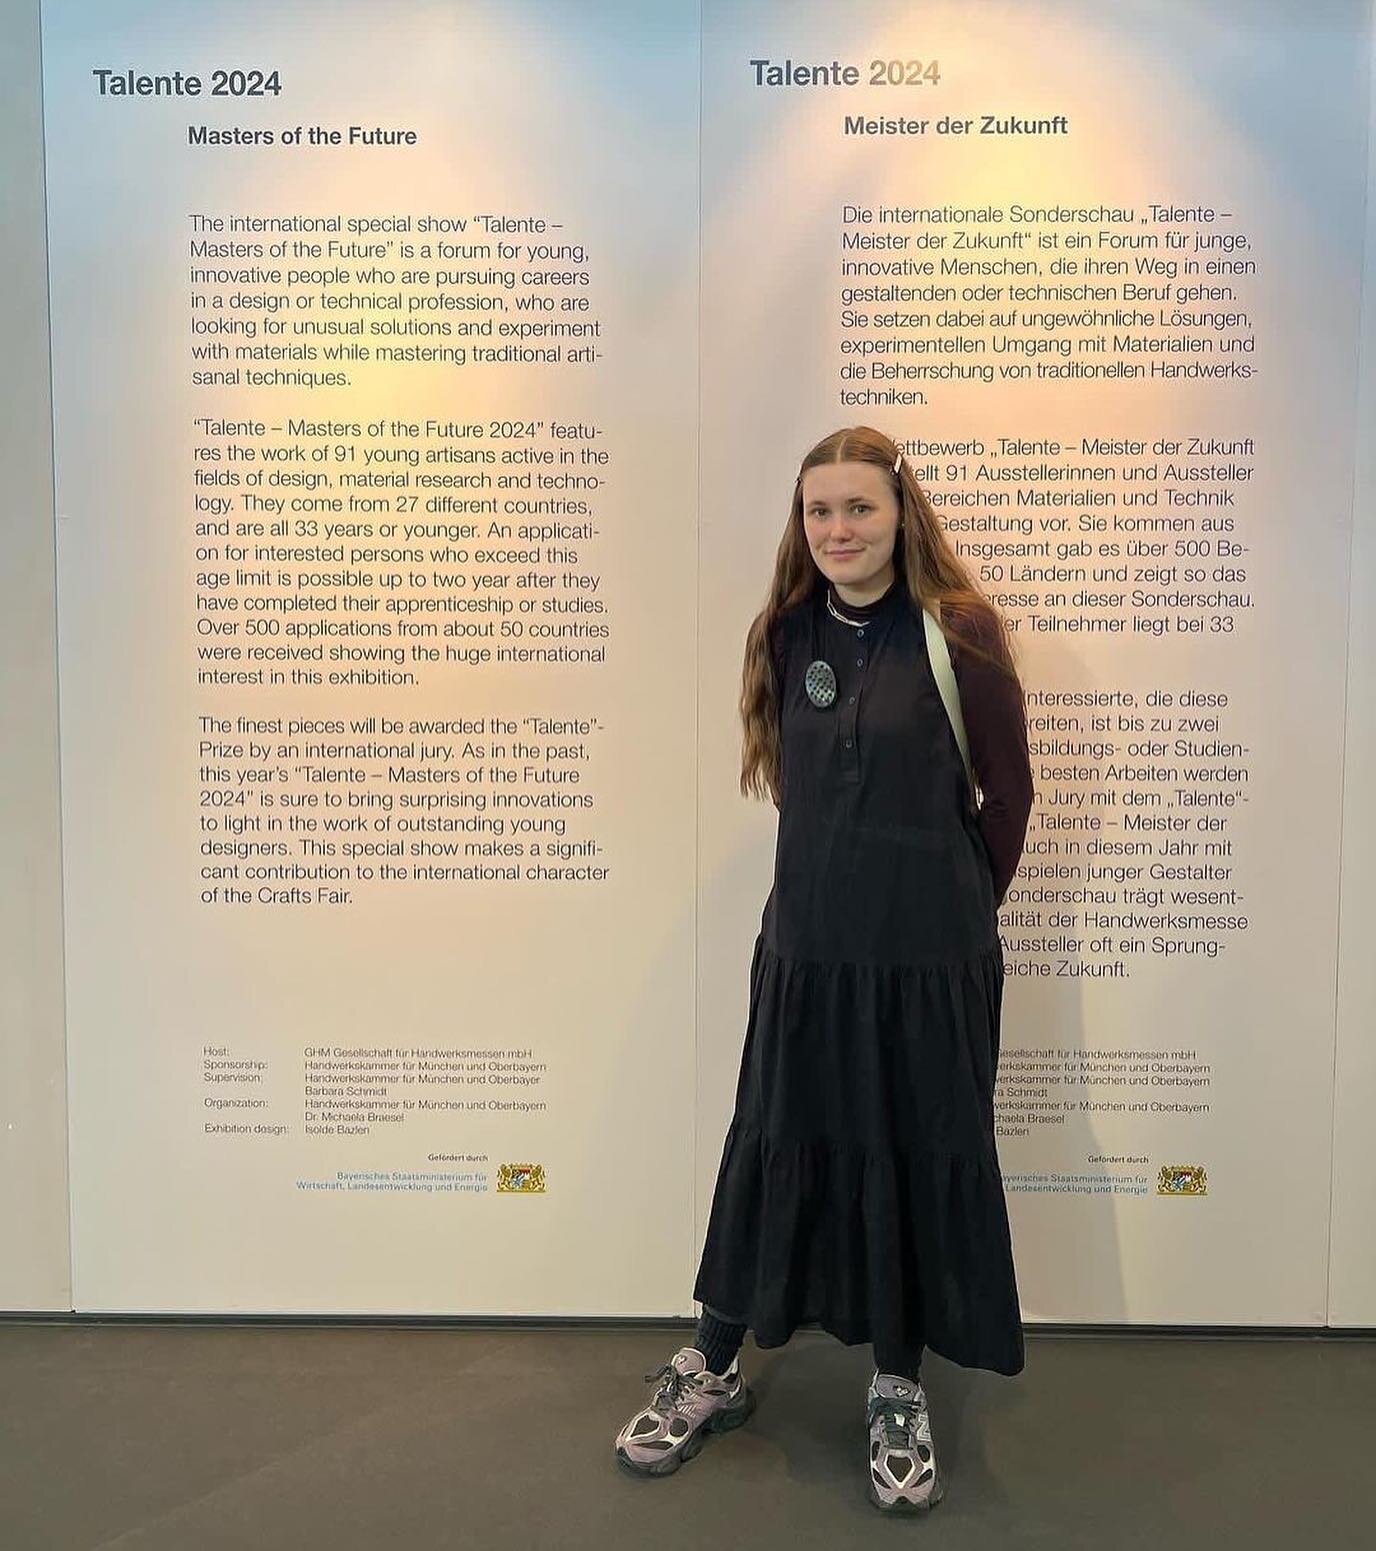 Congratulations to BA (Fine Art) (Honours) graduate Beth Sanderson on being selected for TALENTE - Masters of the Future 2024 in Munich, Germany. 

TALENTE was founded in 1980 as an international competition for all areas of craft and design. 

@beth